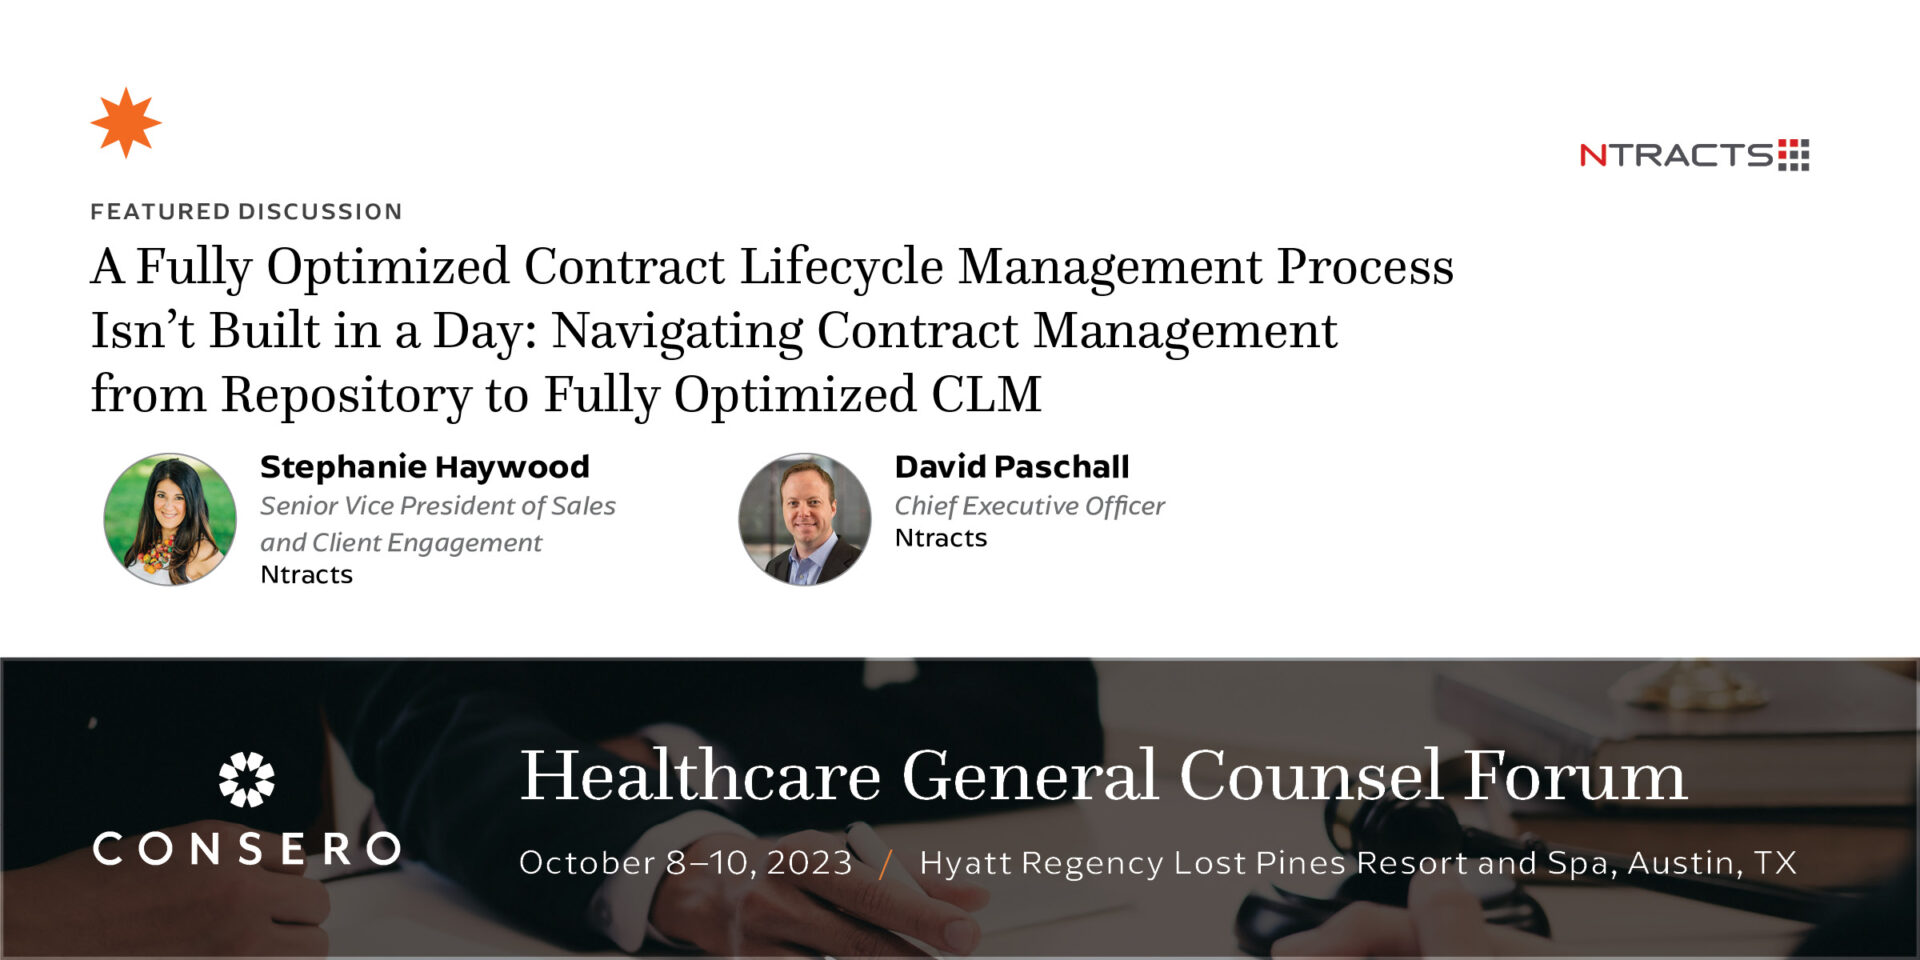 Ntracts' Leaders to Moderate Discussion at the Consero Healthcare General Counsel Forum